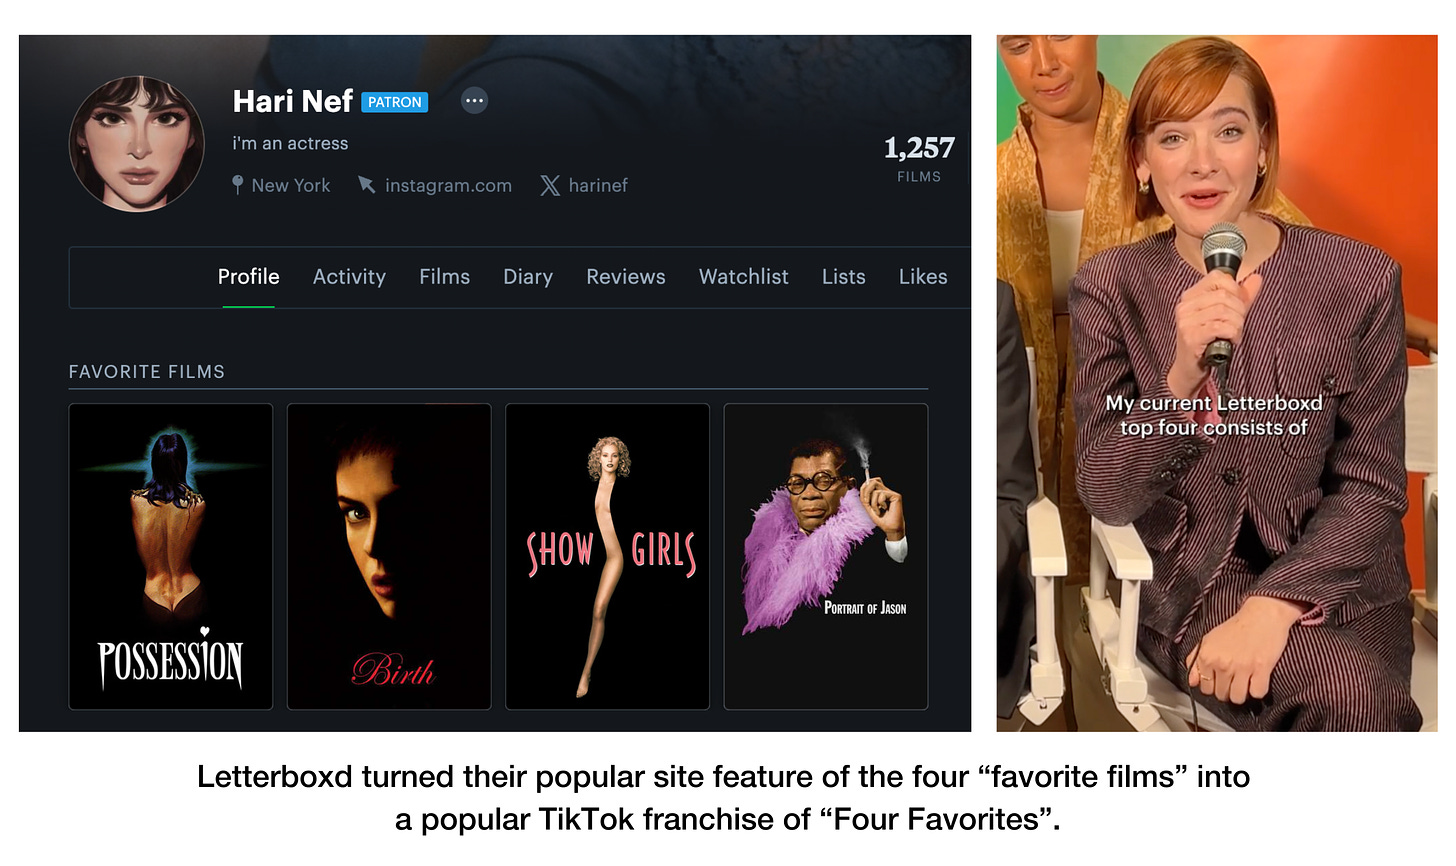 Example of Letterboxd's UI of "Favorite Films" and how it translates to TikTok using Hari Nef as an example